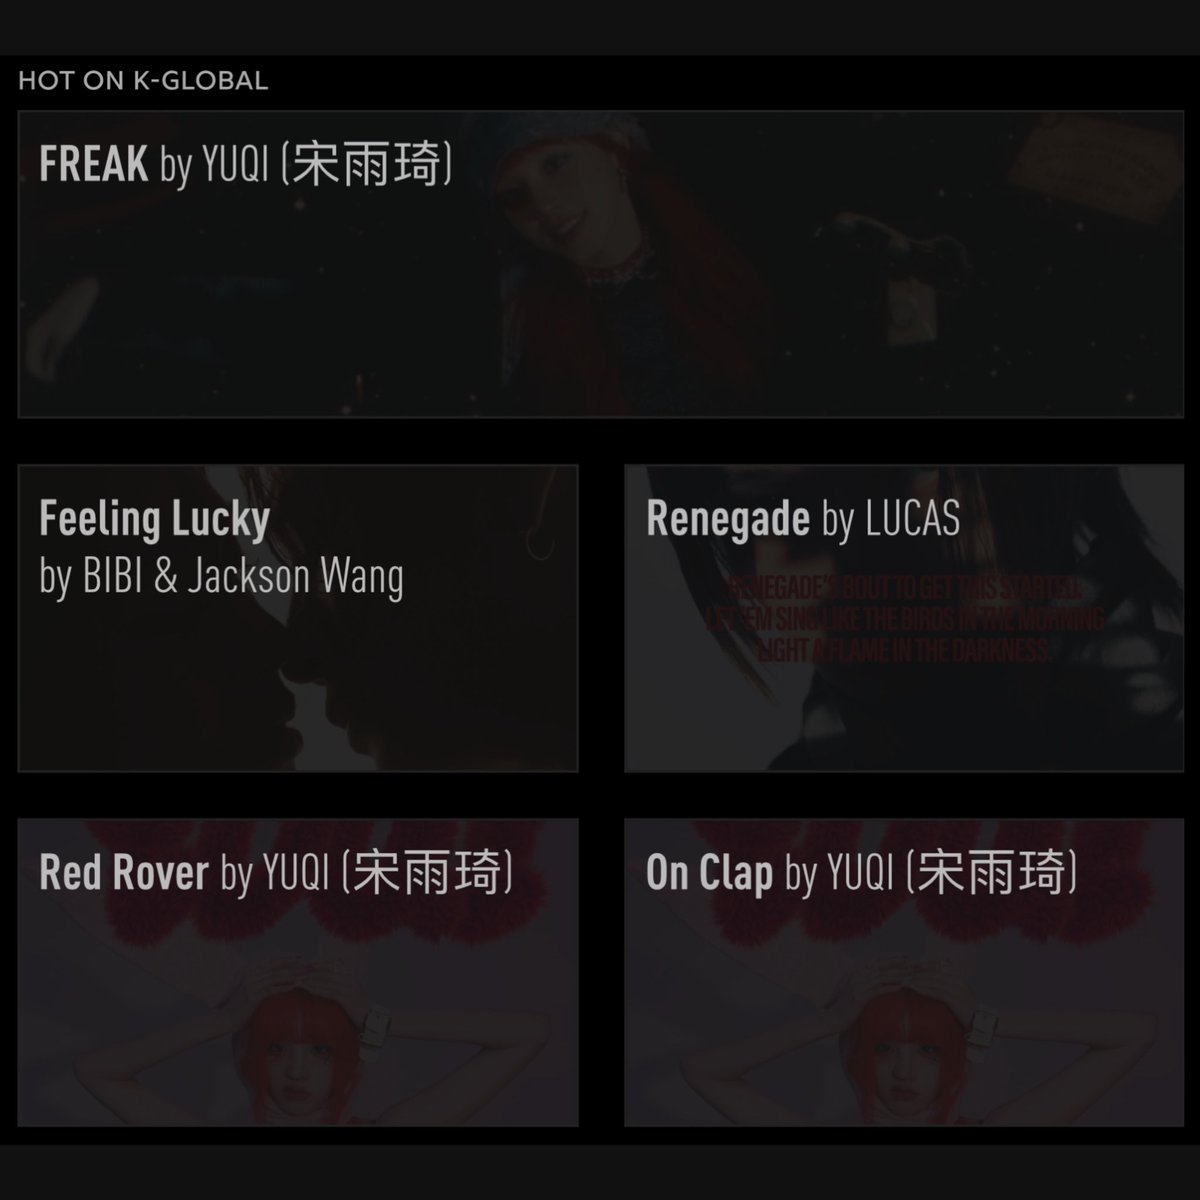 #GeniusCharts | BIBI & Jackson Wang’s latest collaboration, “Feeling Lucky” rises to #2 on the daily K-Global chart in Genius Korea! The song initially debuted in the Top 15 of the chart after their #Coachella performance! genius.com/Bibi-and-jacks…